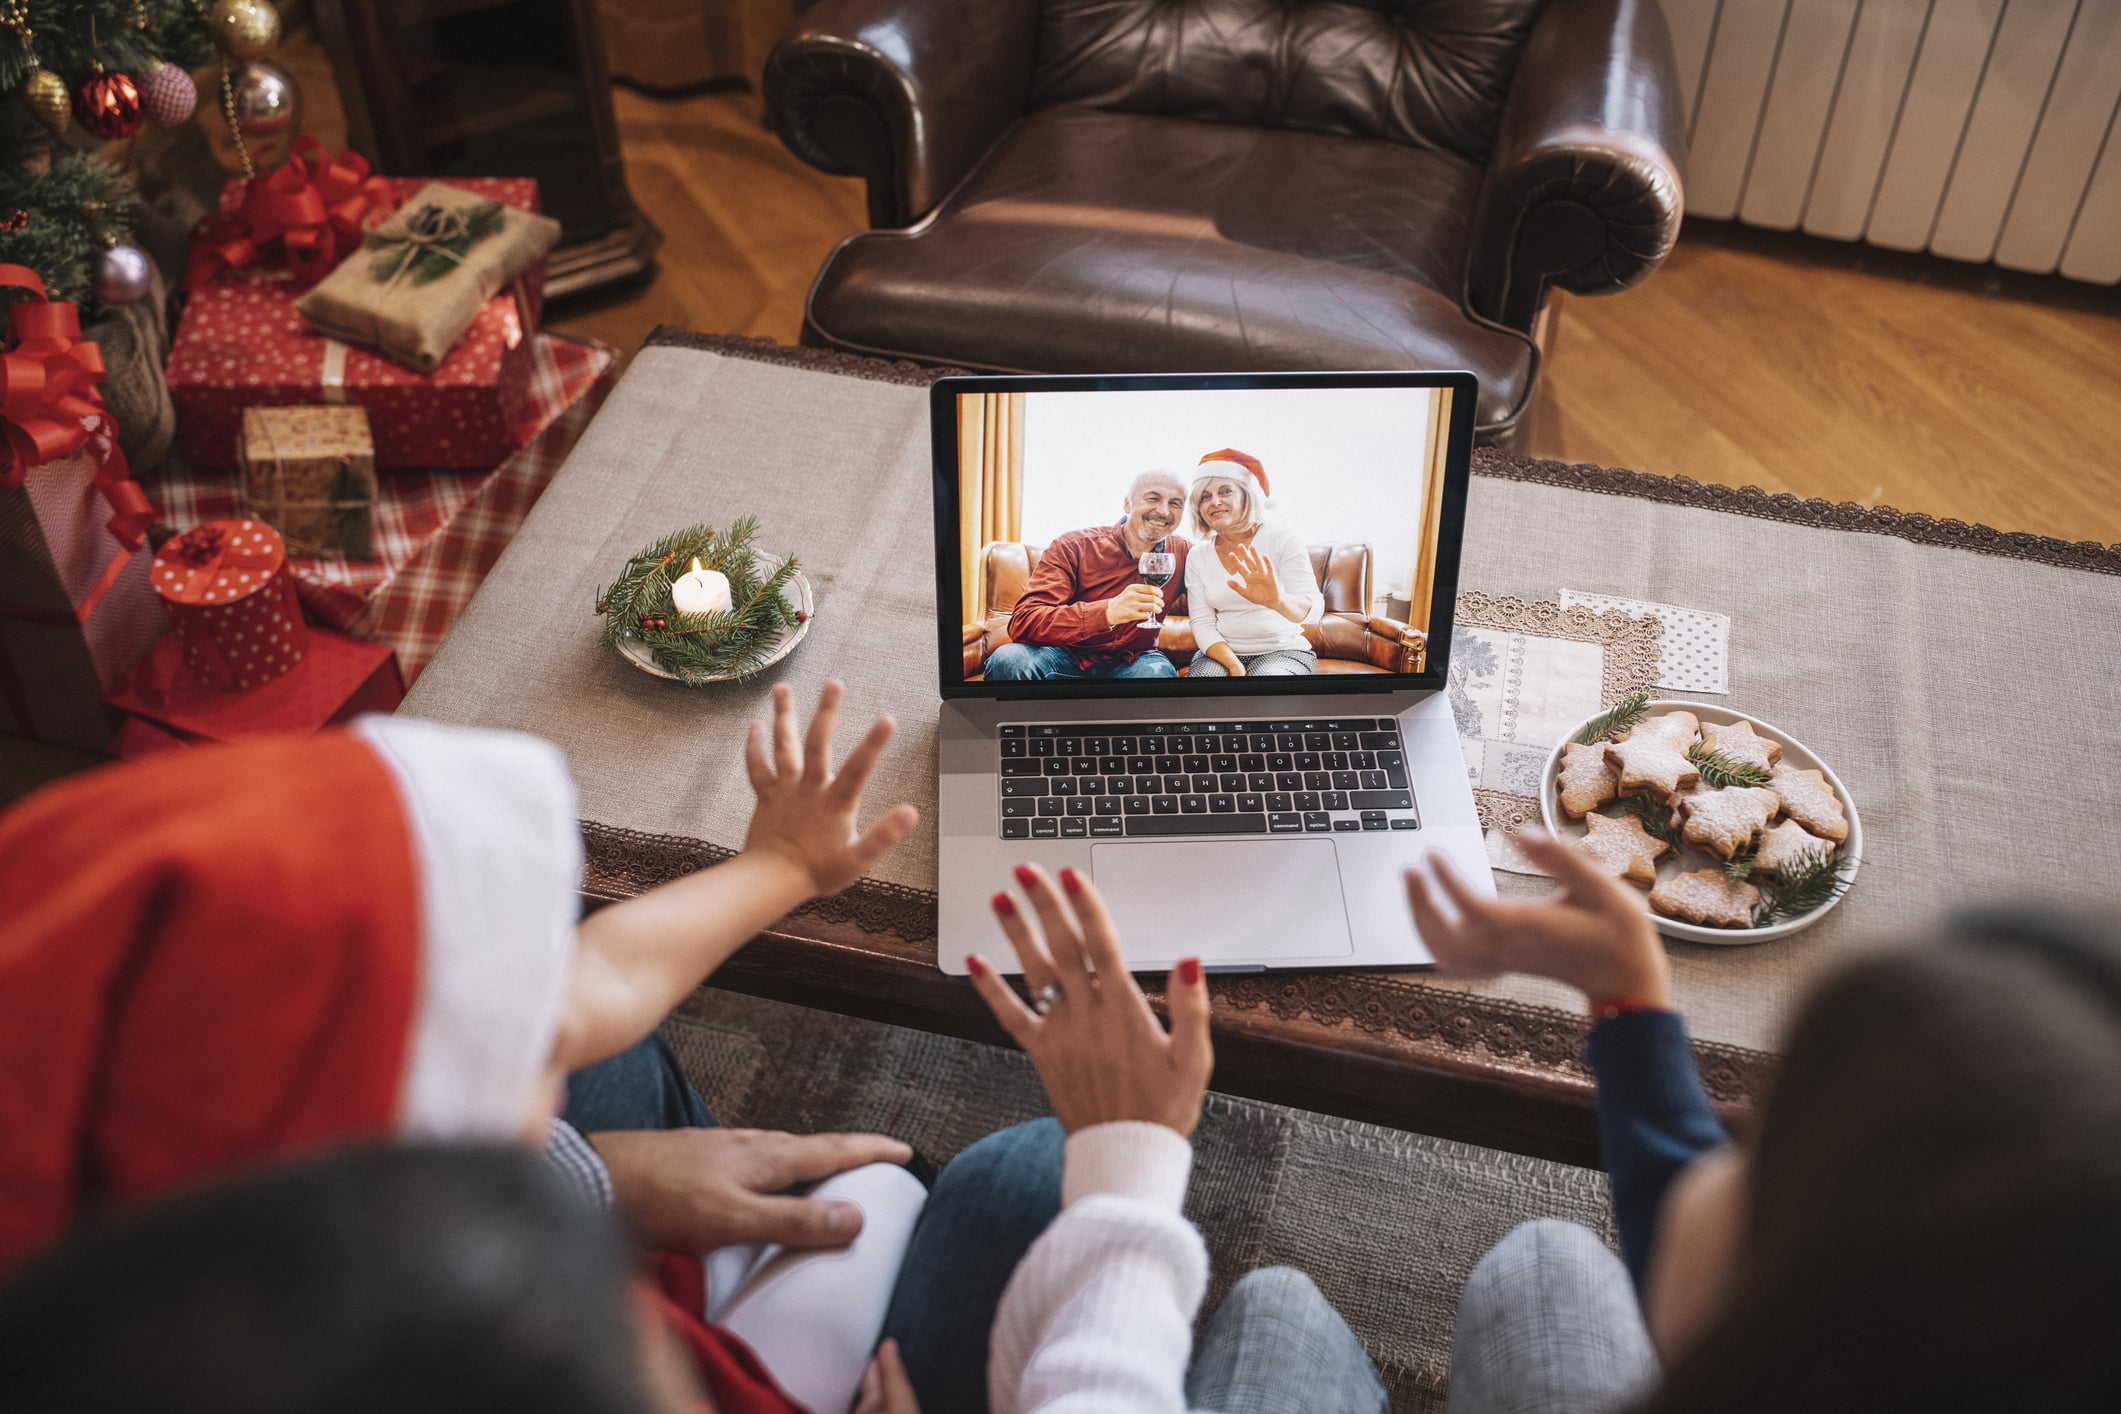 6 User-Friendly Apps to Help Stay Connected Over the Holidays